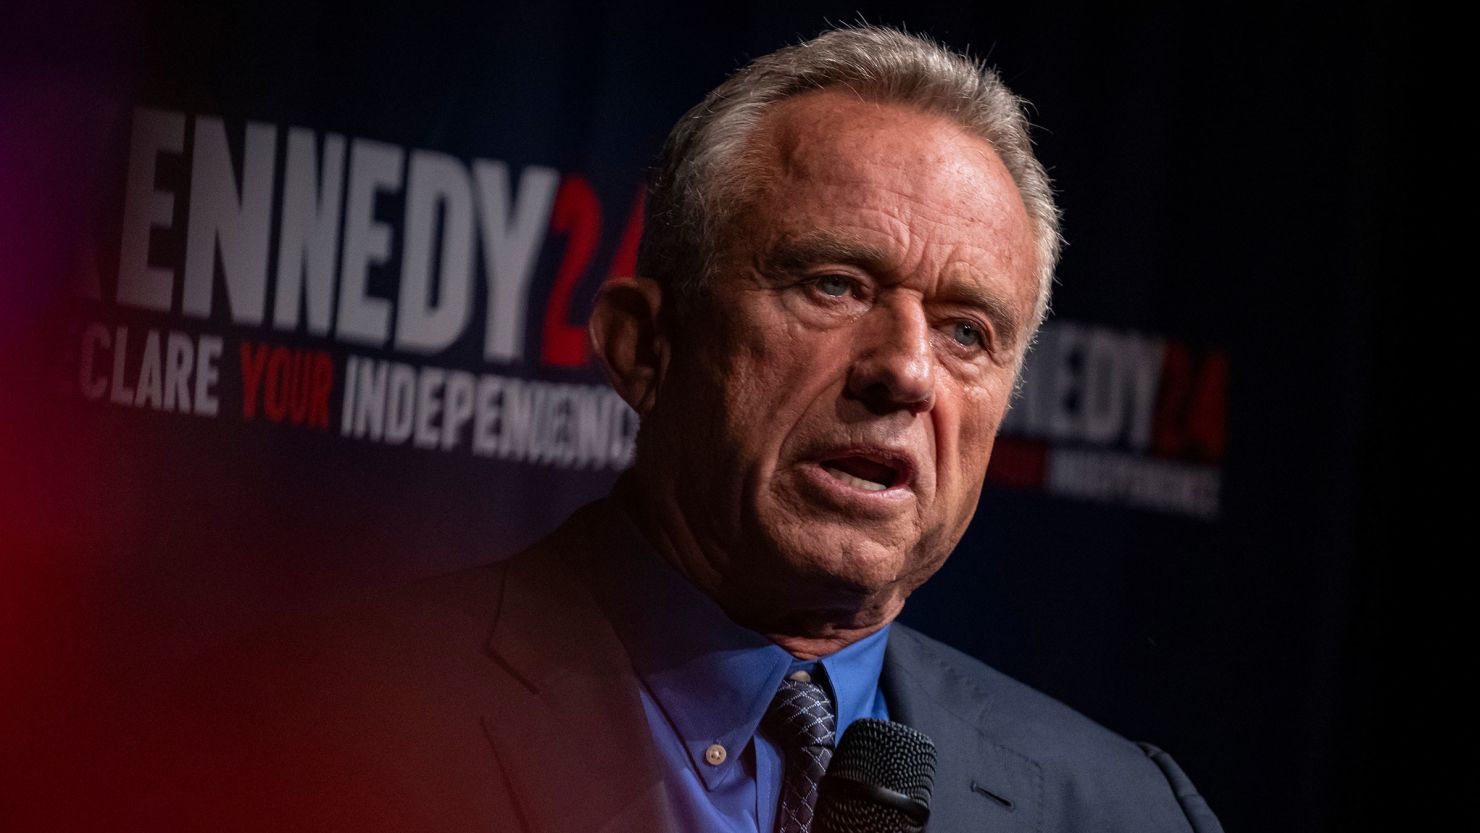 Independent presidential candidate Robert F. Kennedy Jr. speaks during a campaign event in Miami on October 12, 2023.